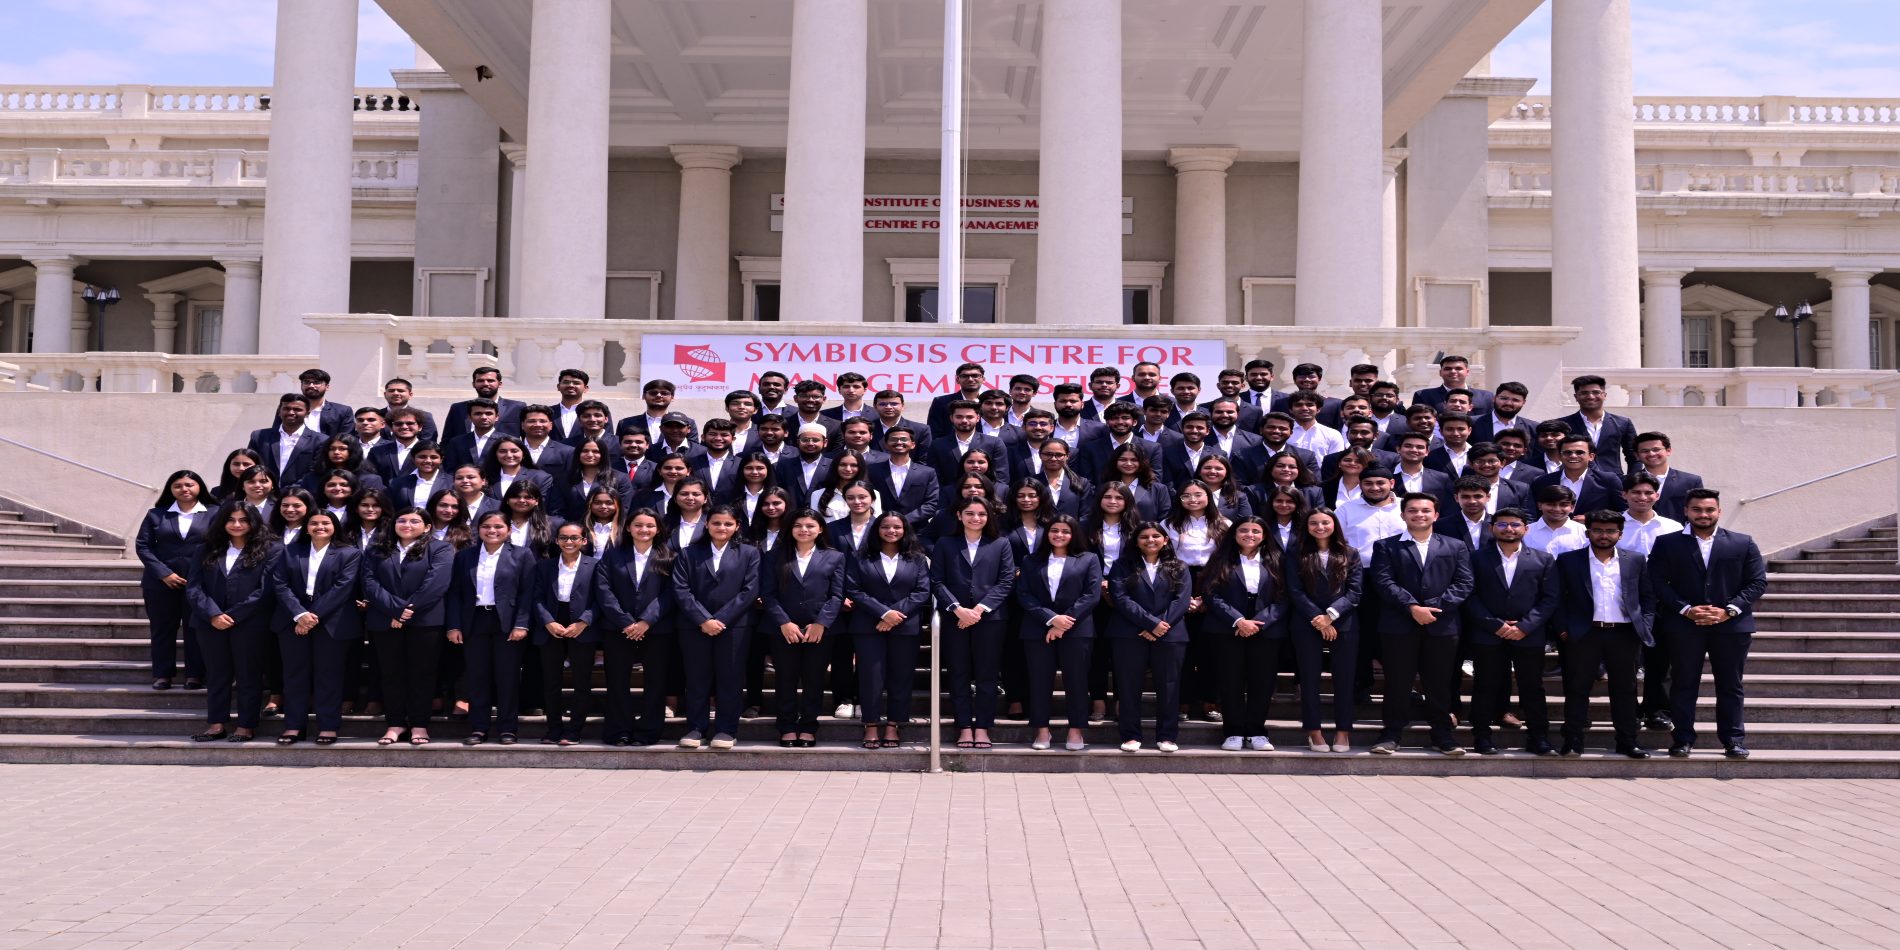 SCMS management colleges in nagpur Students
